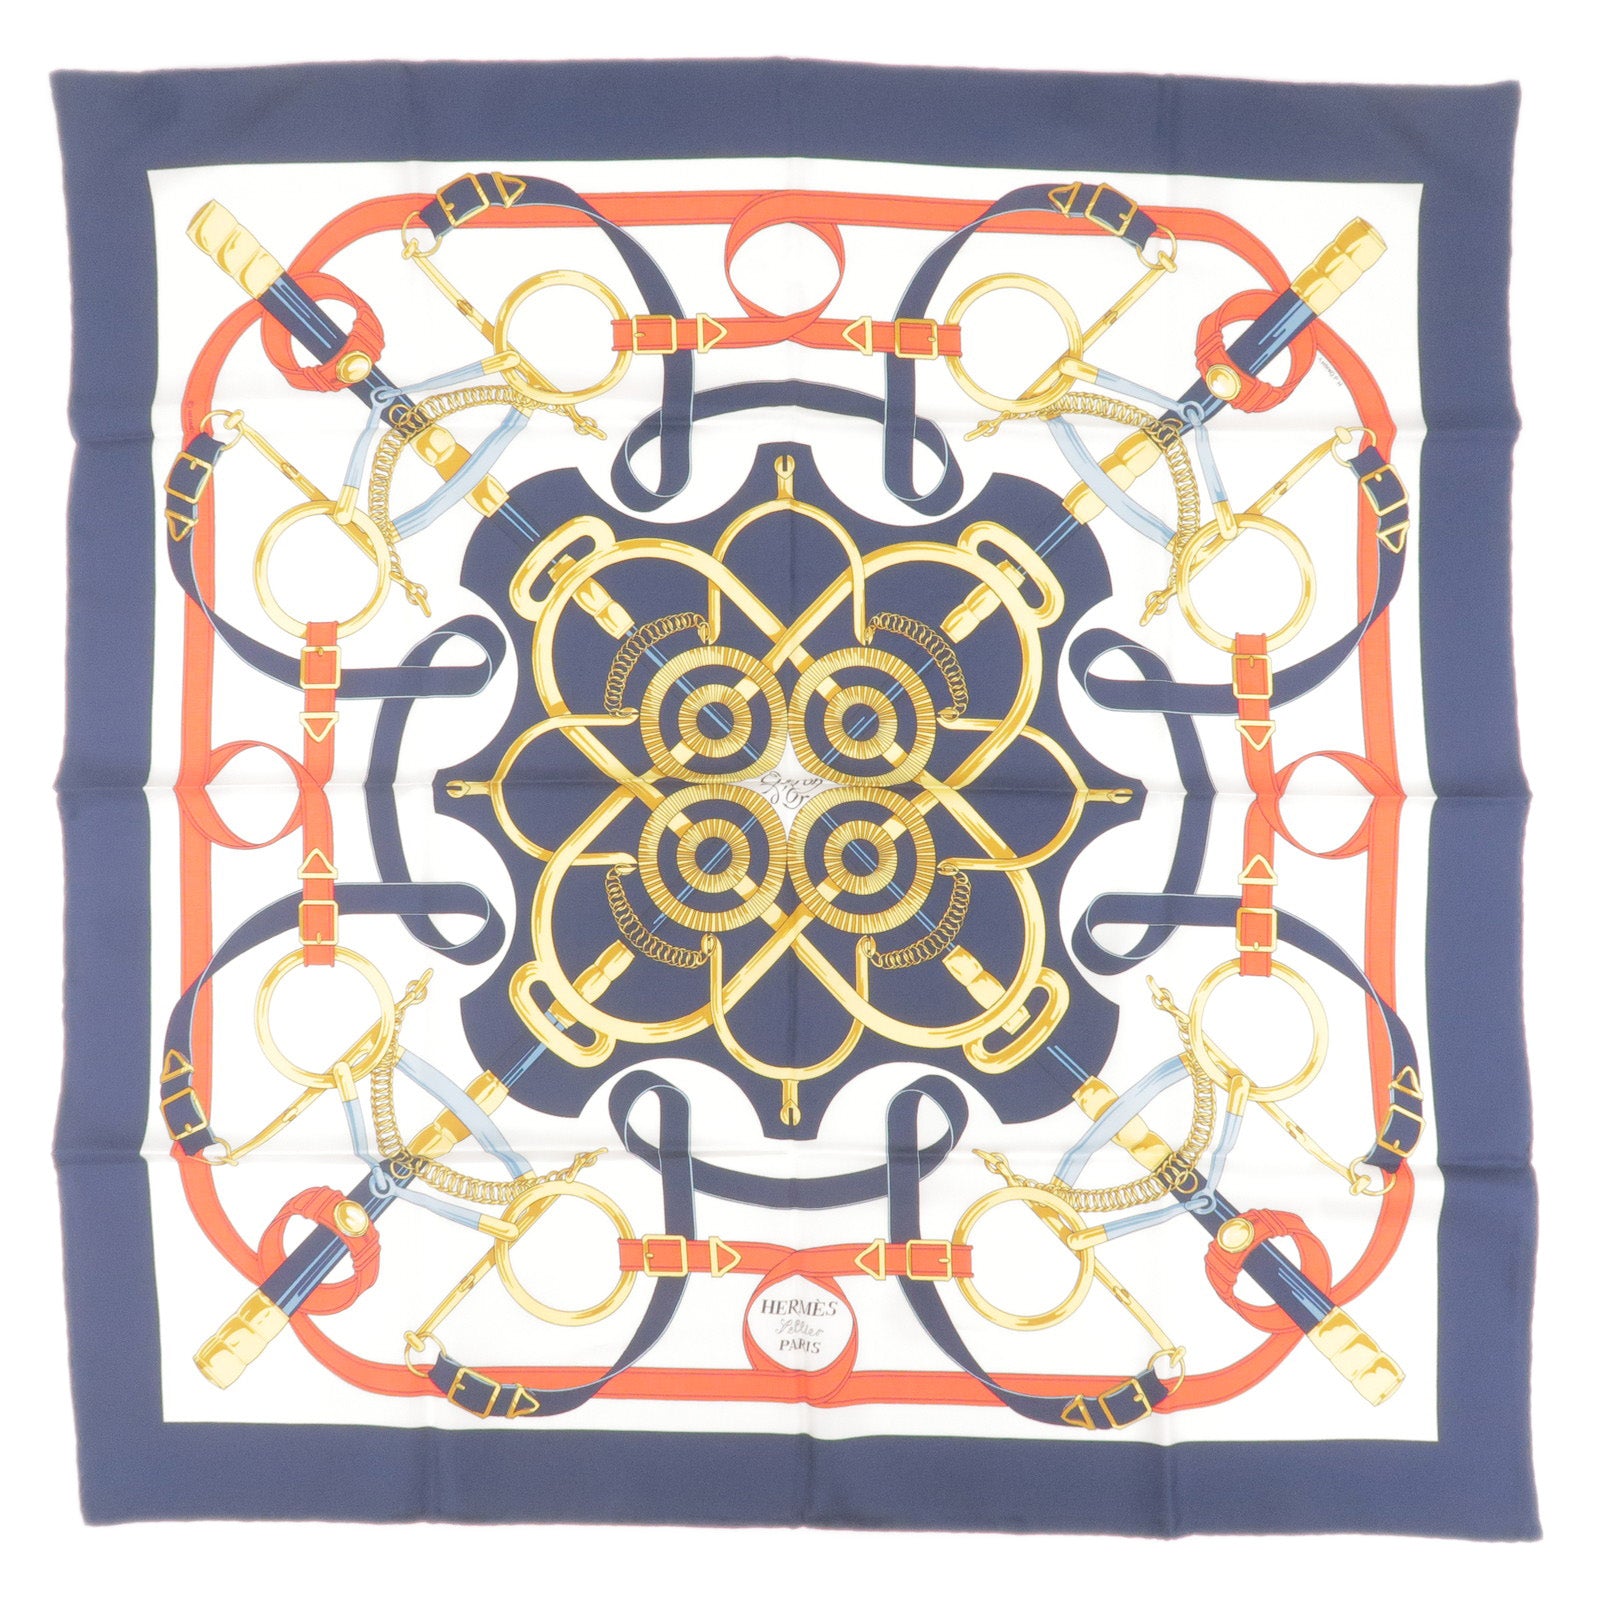 HERMES-Carre-90-Silk-100%-Scarf-Eperon-d-or-Navy